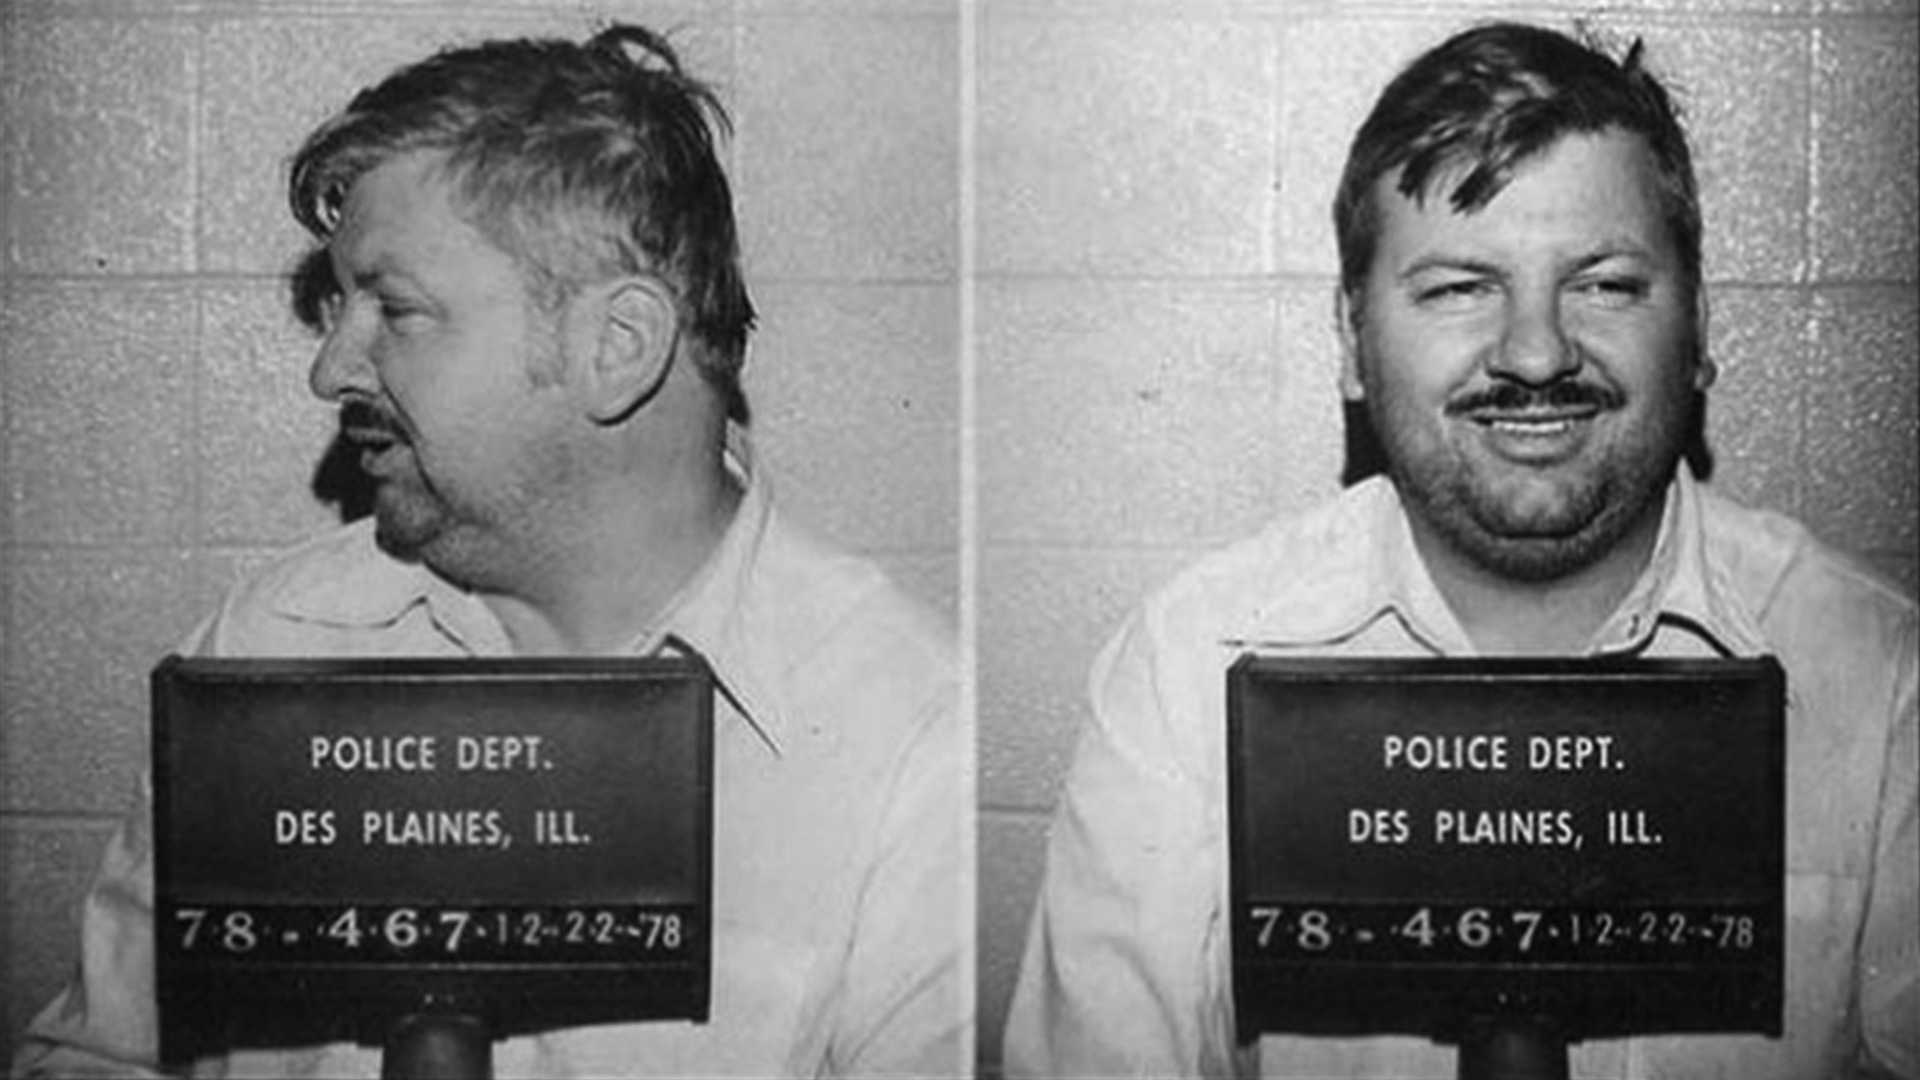 John Wayne Gacy, Jeffrey Dahmer and Others: Ranking Serial Killers on a Scale of Evil